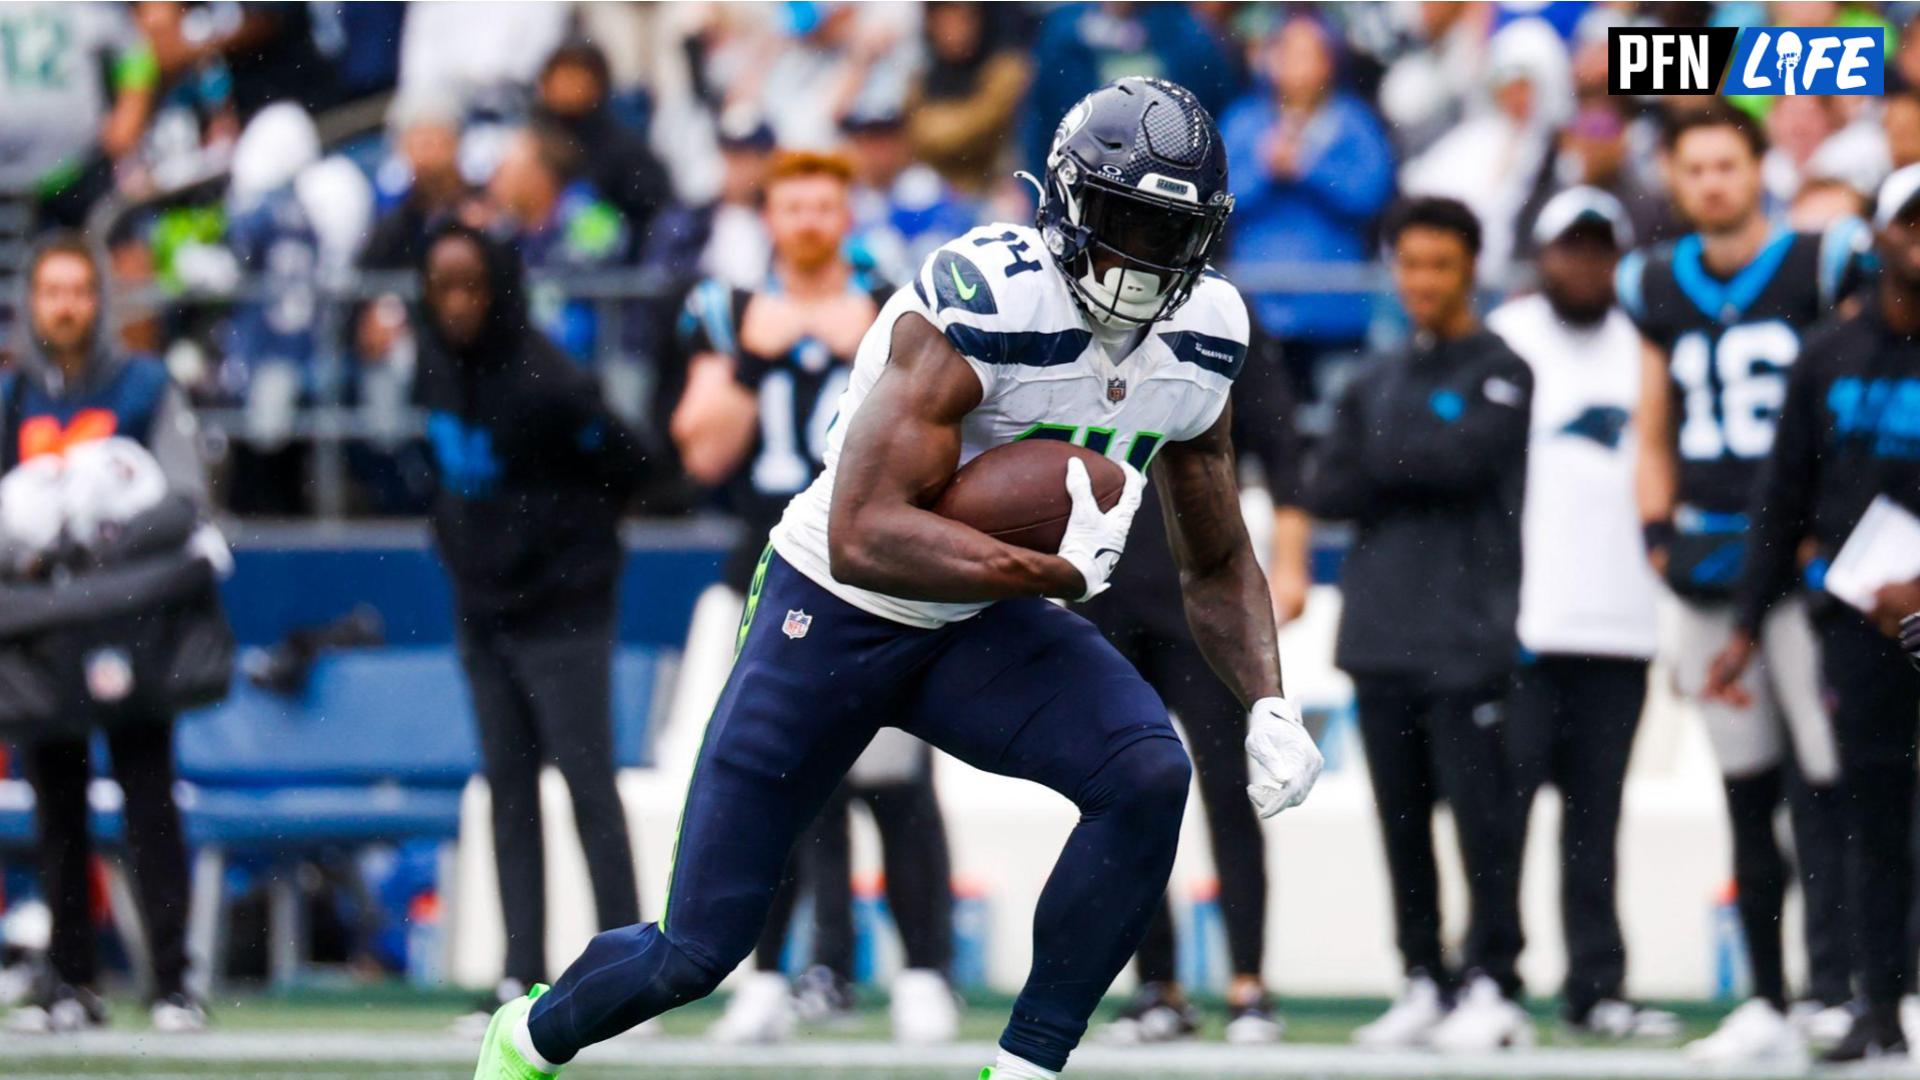 Seattle Seahawks wide receiver DK Metcalf (14) runs for yards after the catch against the Carolina Panthers during the second quarter at Lumen Field.